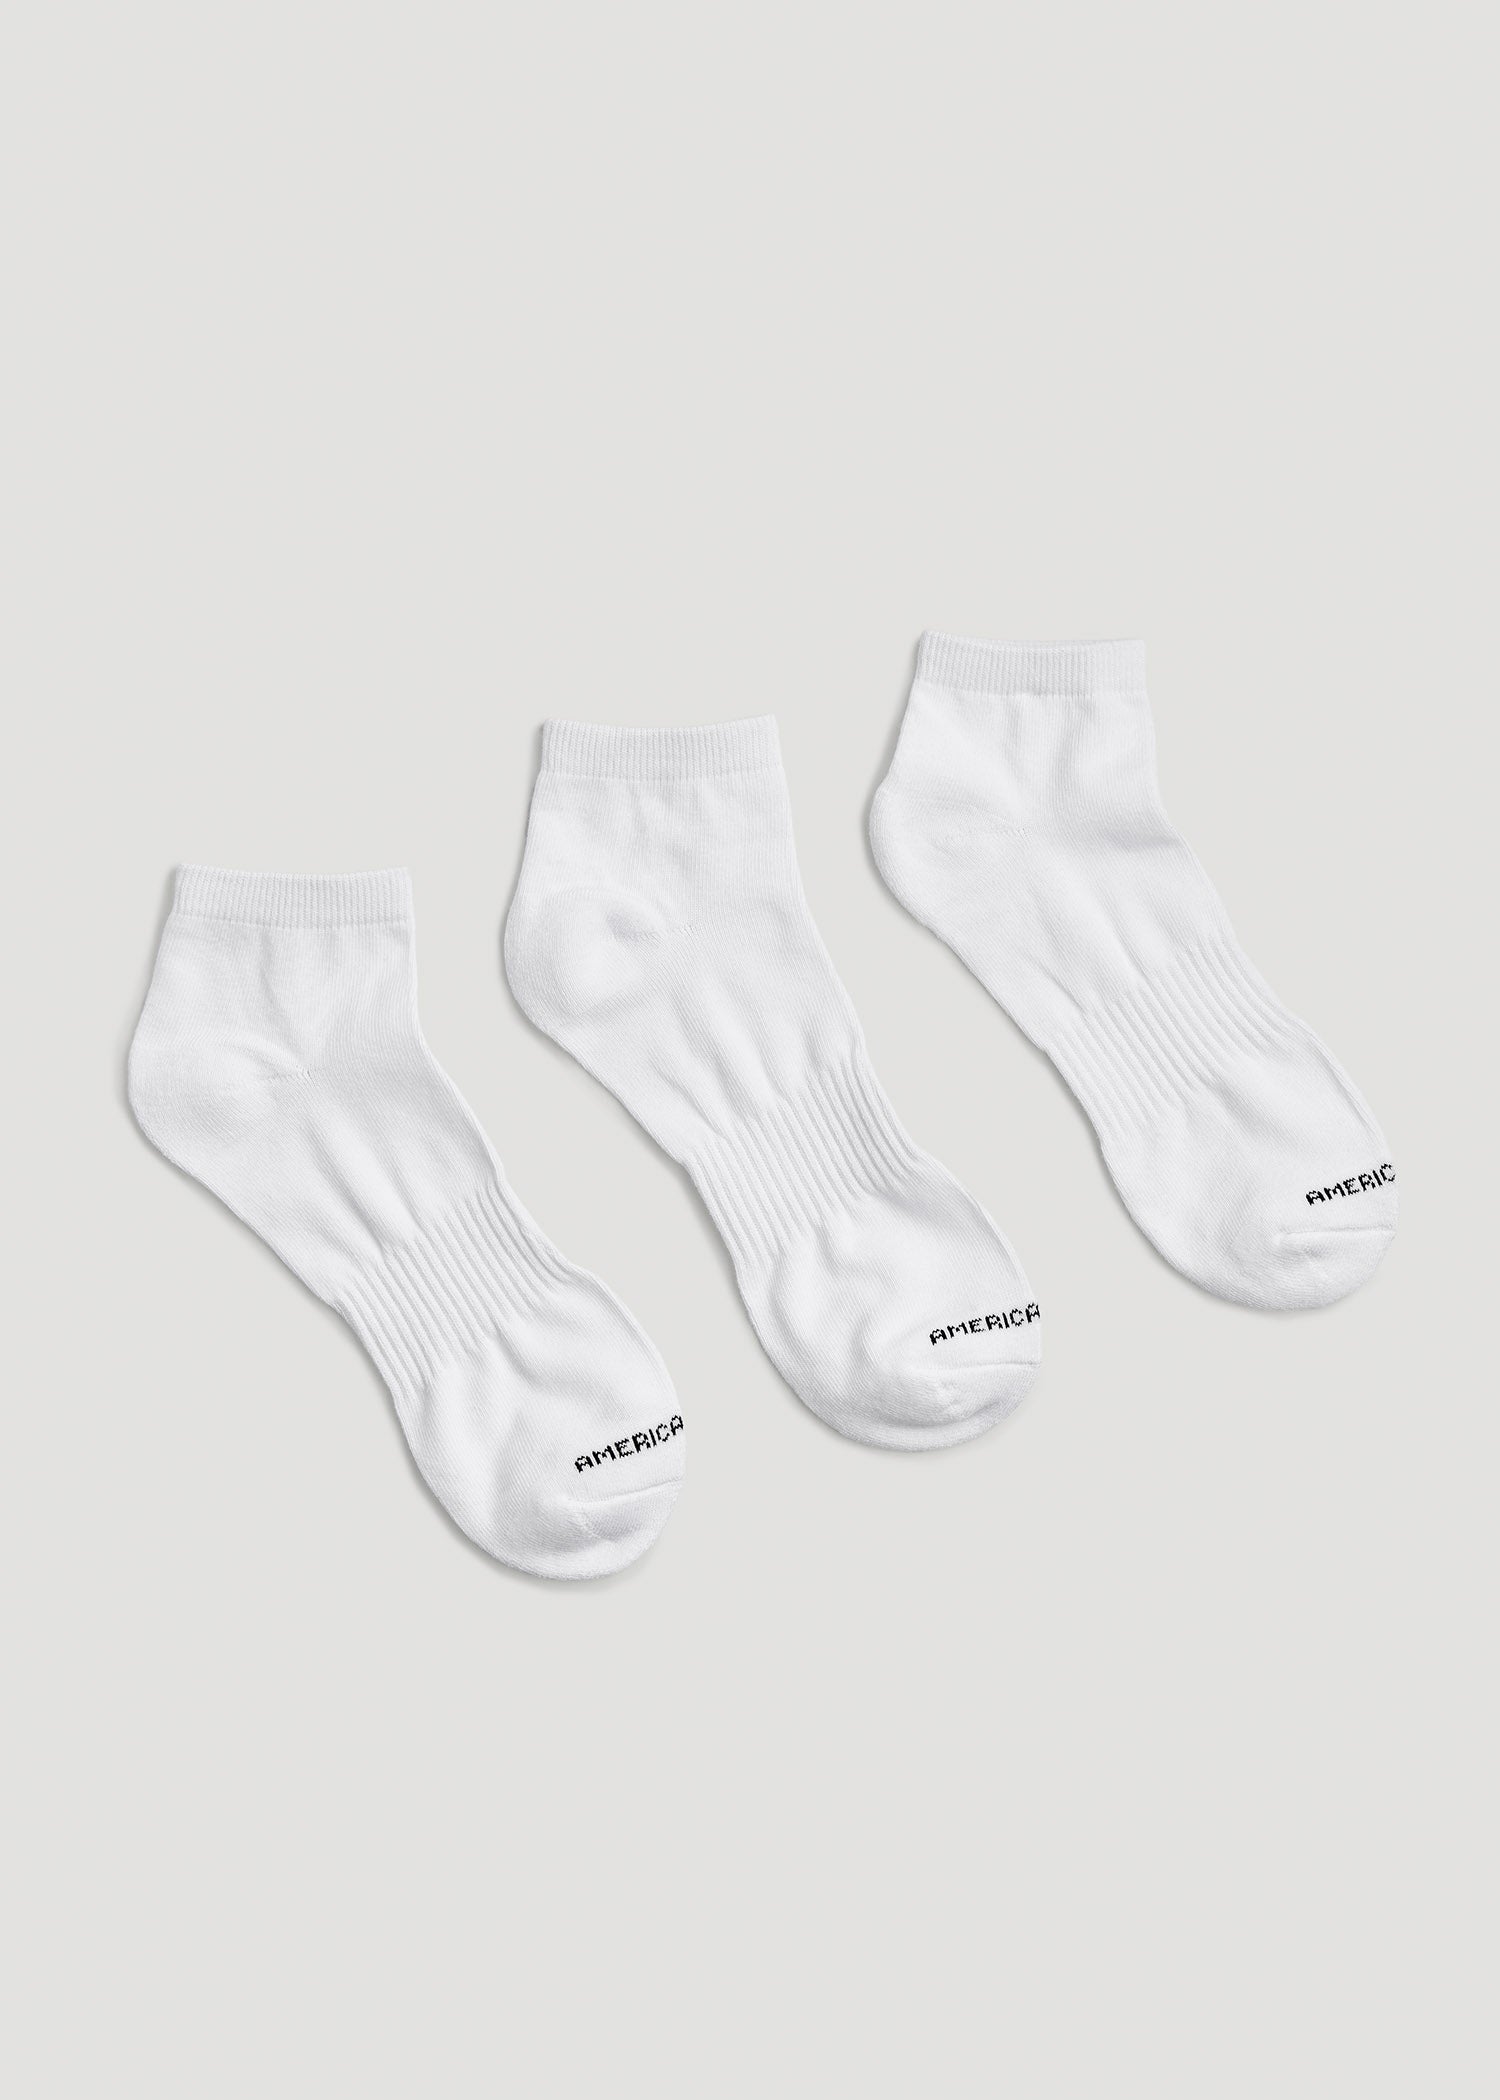 Men's Athletic Low Ankle Socks (X-Large Size: 13-15) | White 3 Pack ...